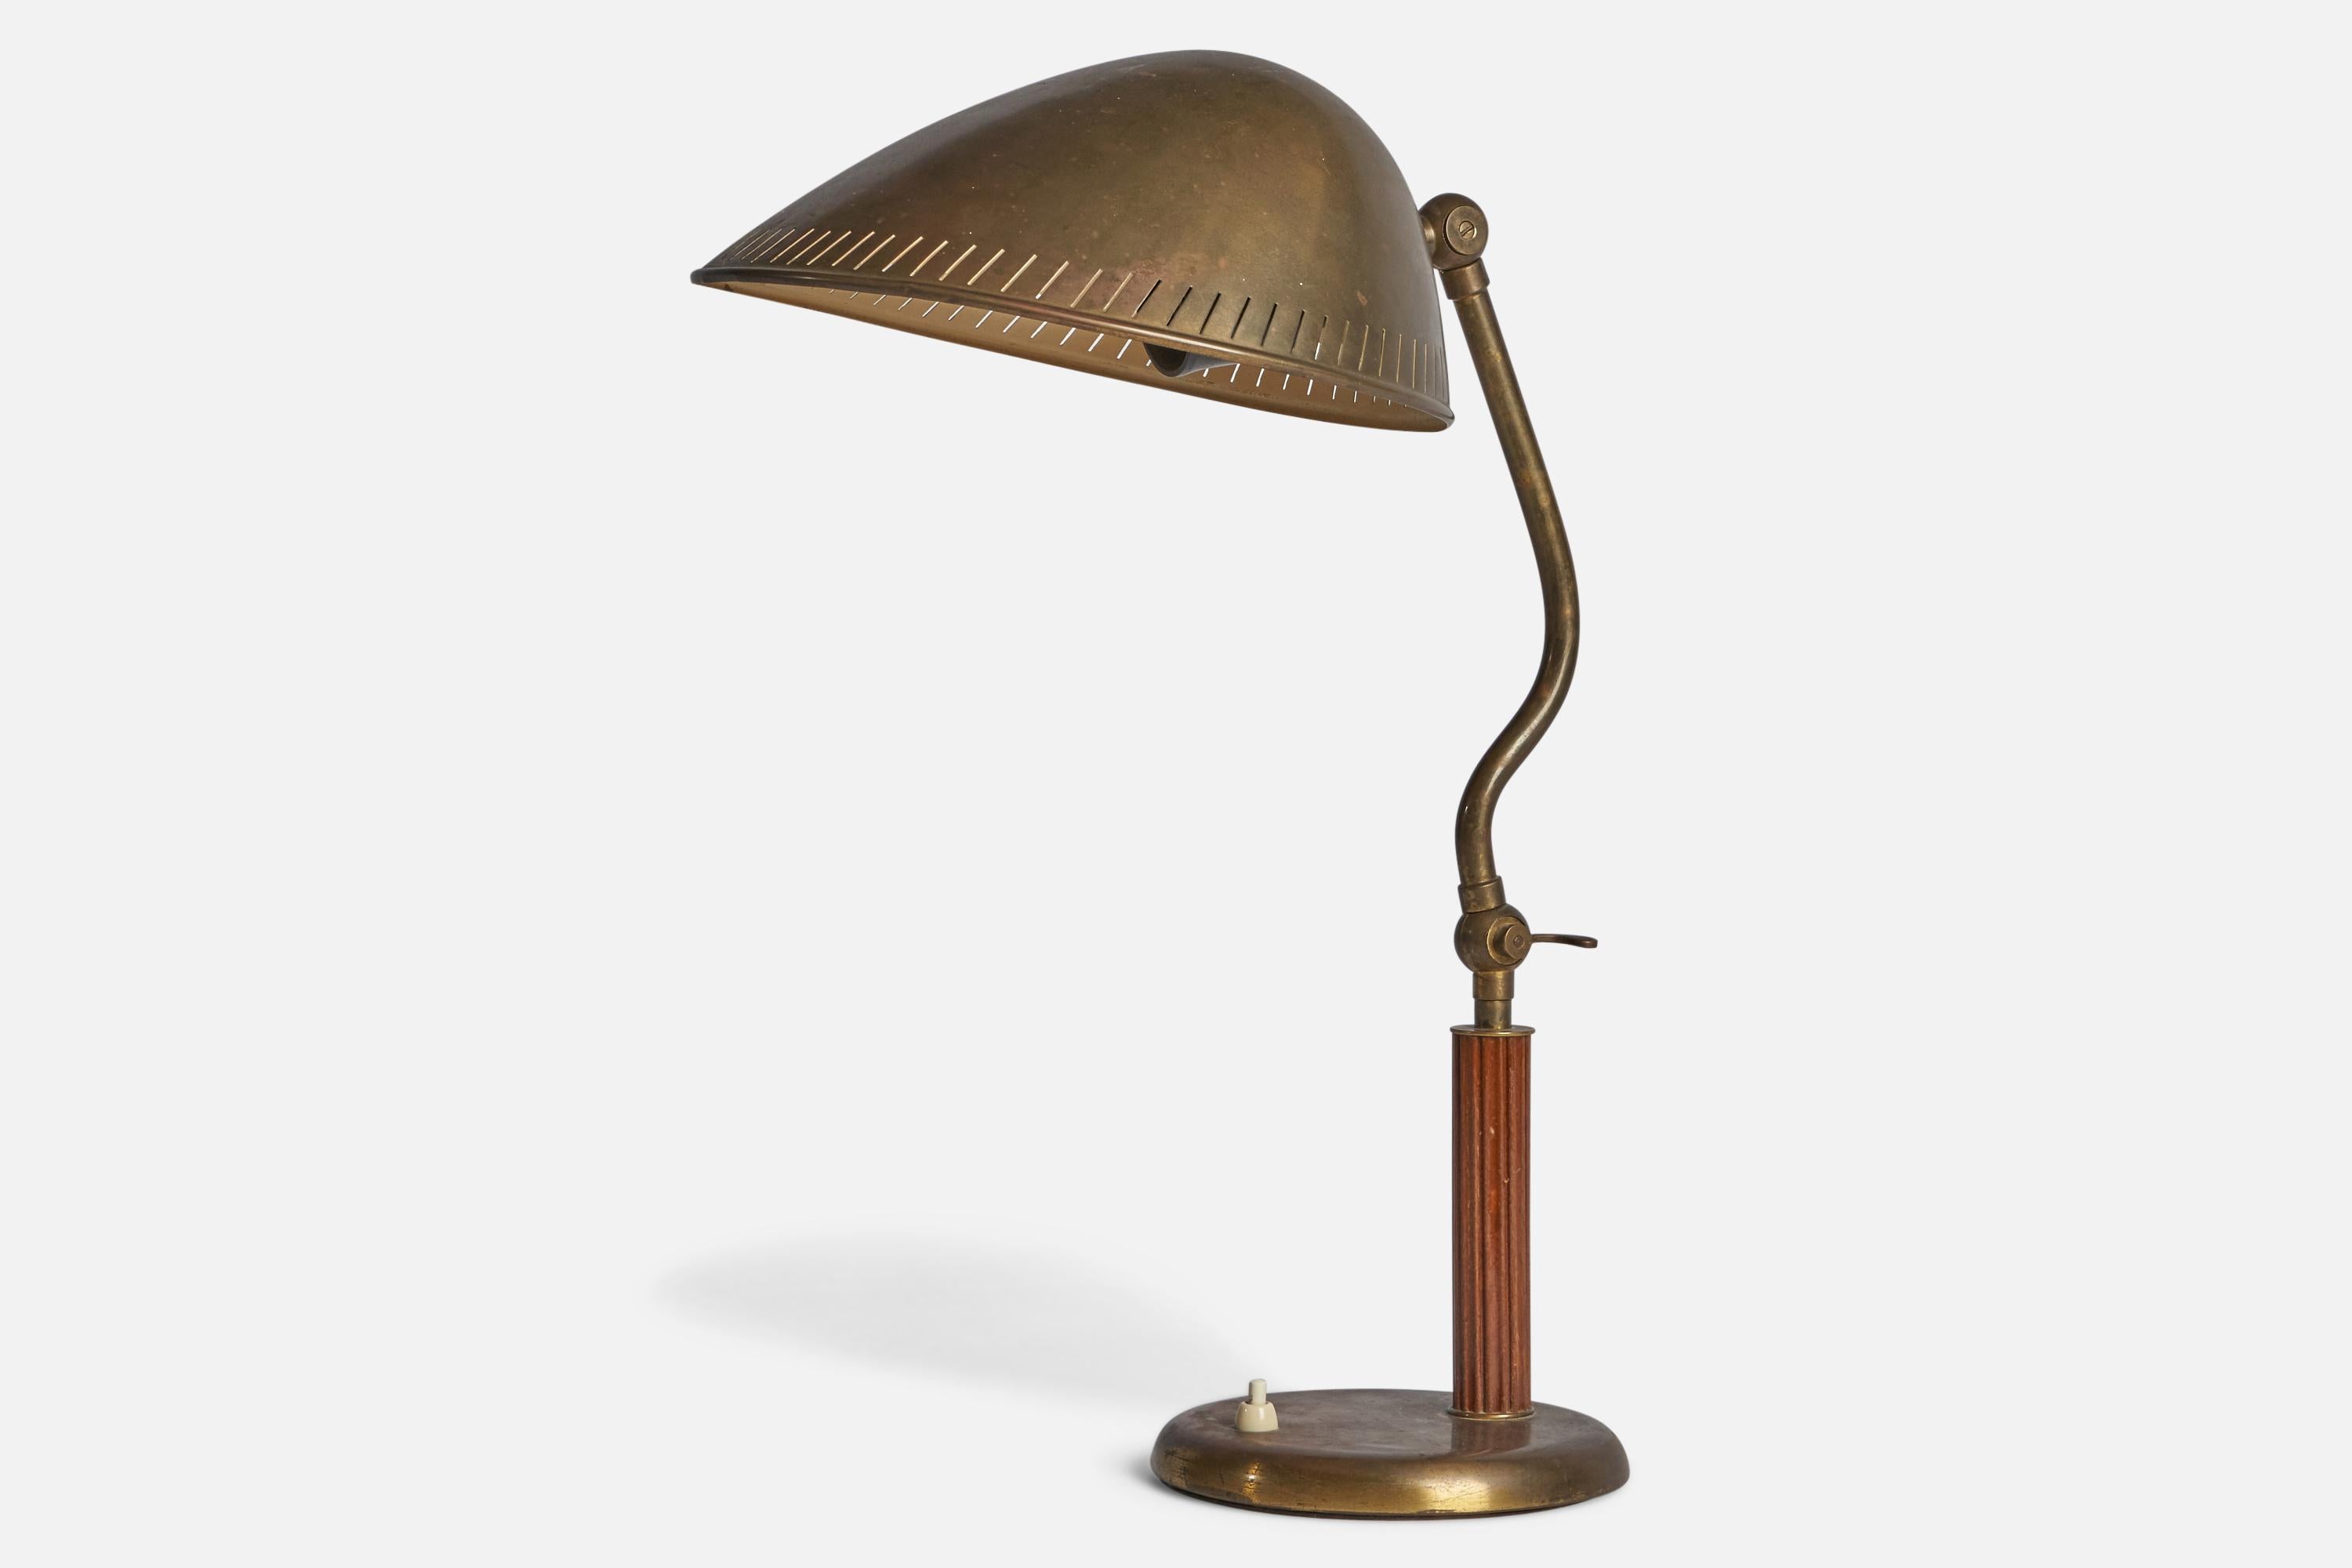 An adjustable brass and elm table lamp, designed and production attributed to Böhlmarks, Sweden, 1930s.

Overall Dimensions (inches): 18.25” H x 9.5” W x 12” D
Bulb Specifications: E-26 Bulb
Number of Sockets: 1
All lighting will be converted for US